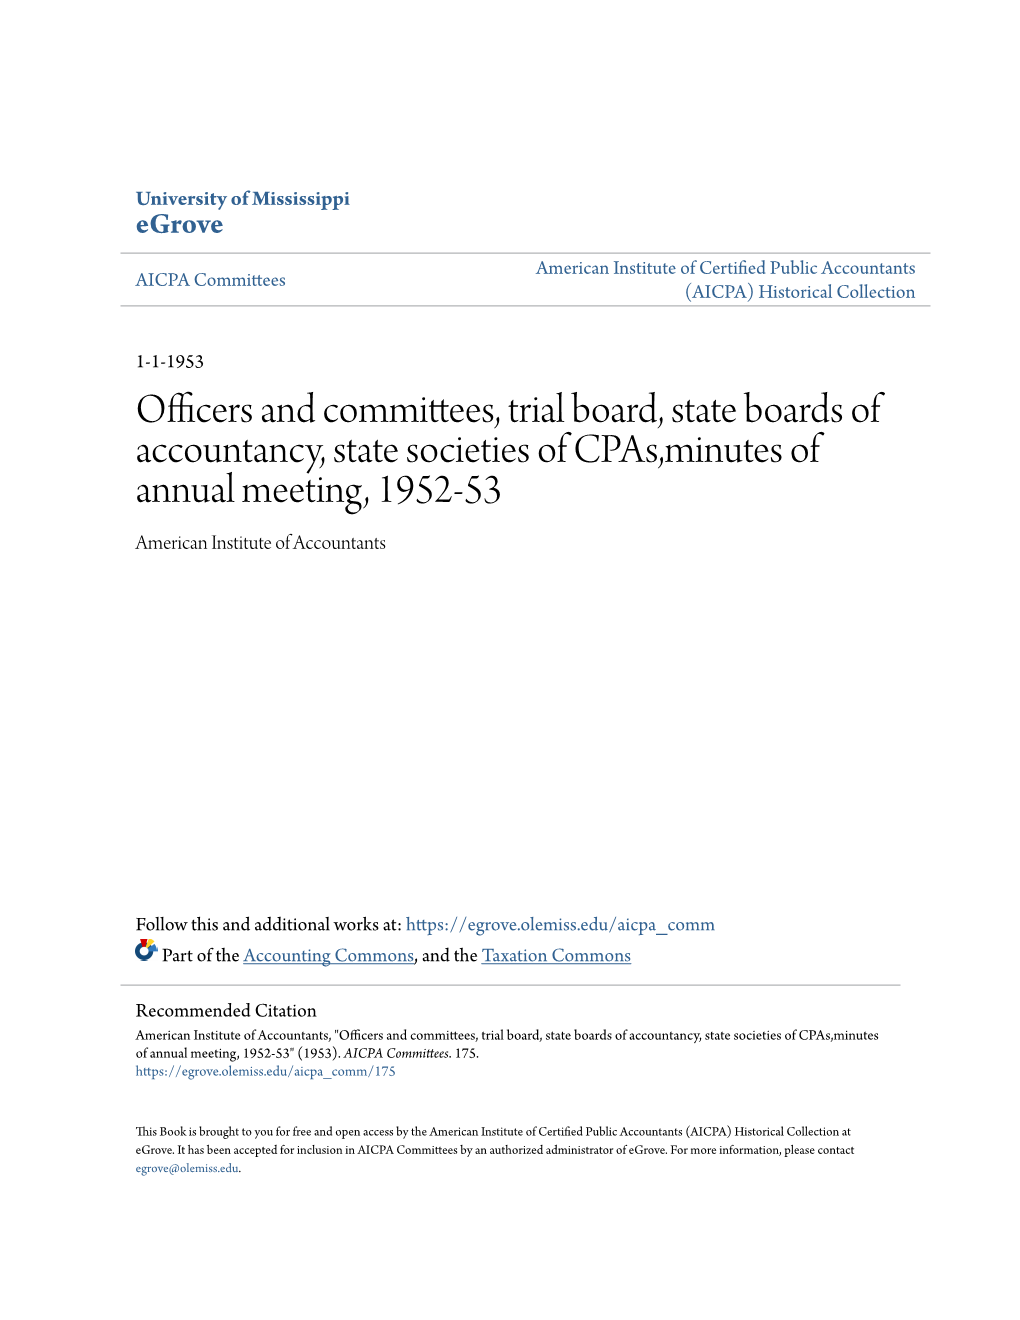 Officers and Committees, Trial Board, State Boards of Accountancy, State Societies of Cpas,Minutes of Annual Meeting, 1952-53 American Institute of Accountants